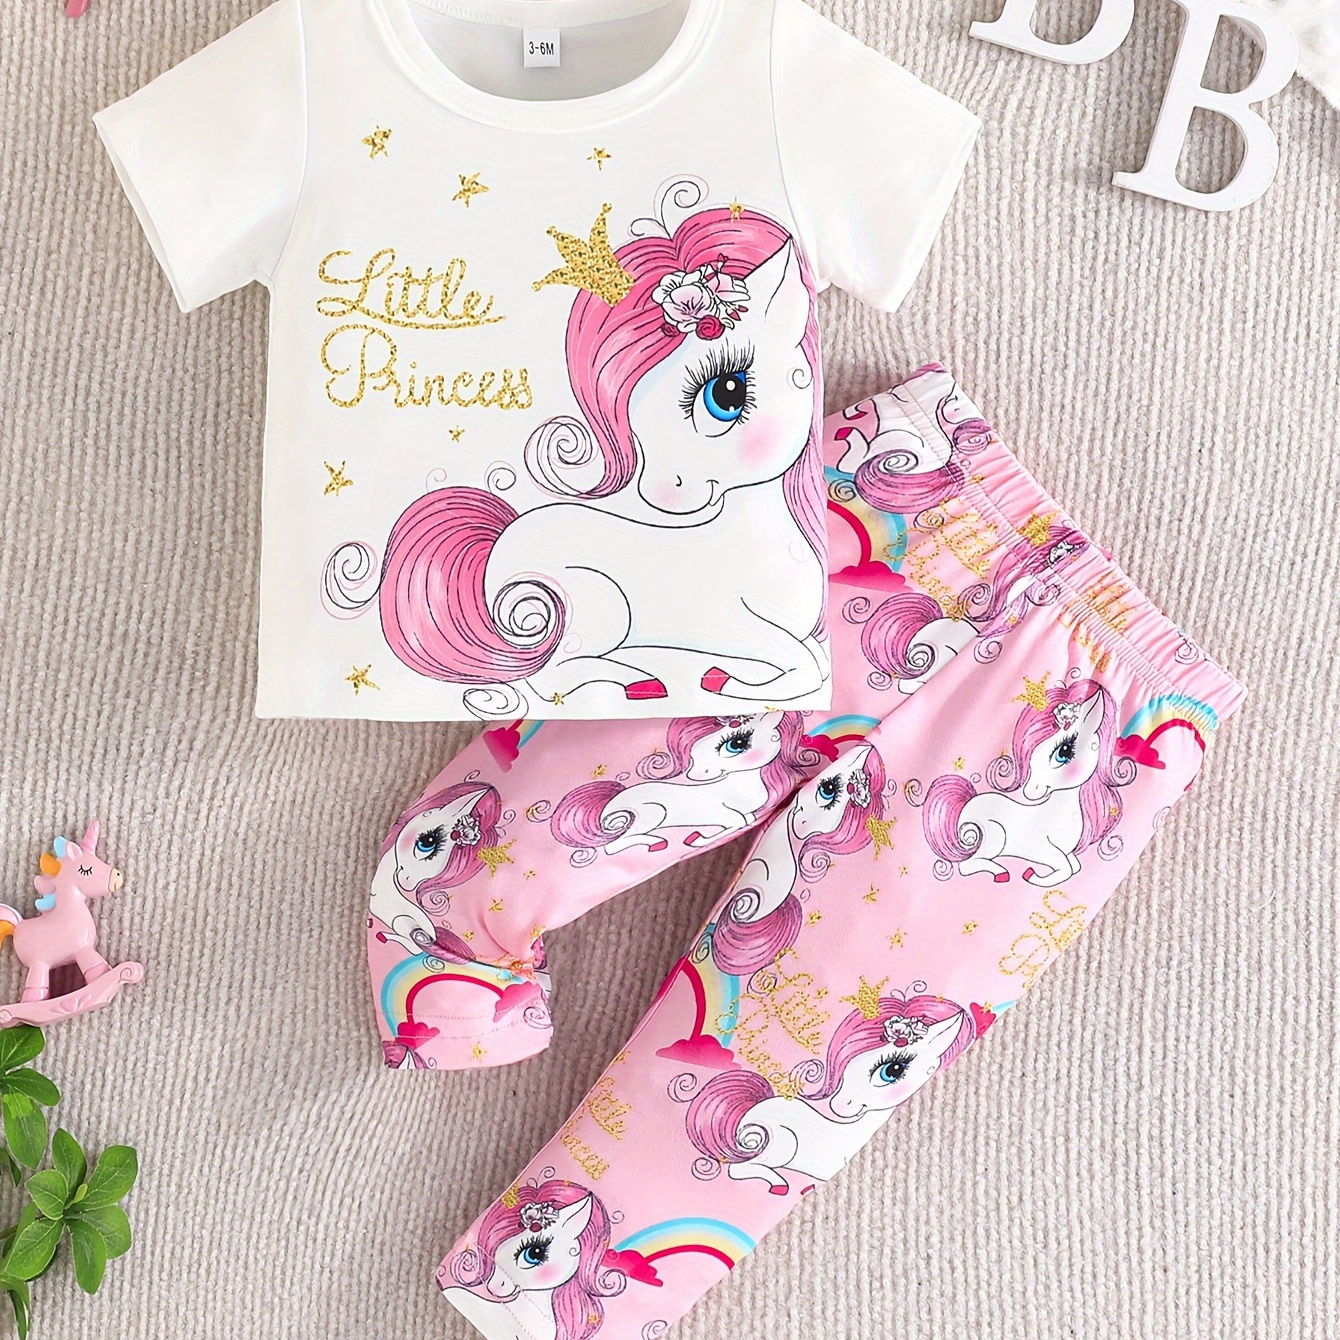 

Baby's "little Princess" Unicorn Print 2pcs Casual Outfit, T-shirt & Pants Set, Toddler & Infant Girl's Clothes For Daily/holiday/party